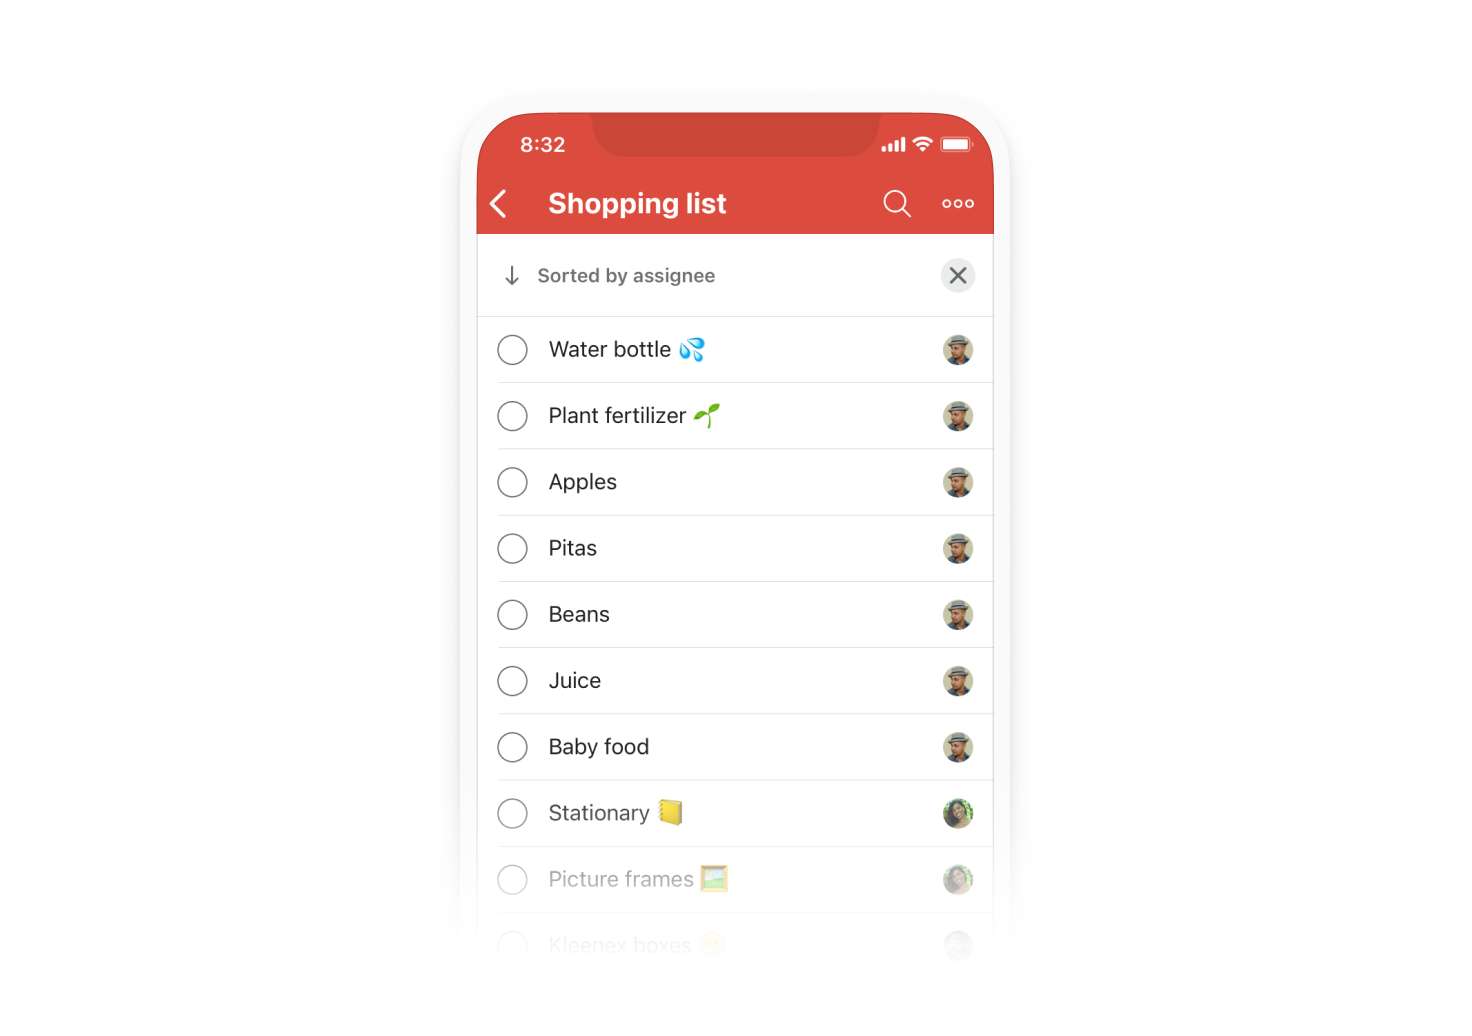 Todoist sorting Shopping list sorted by assignee